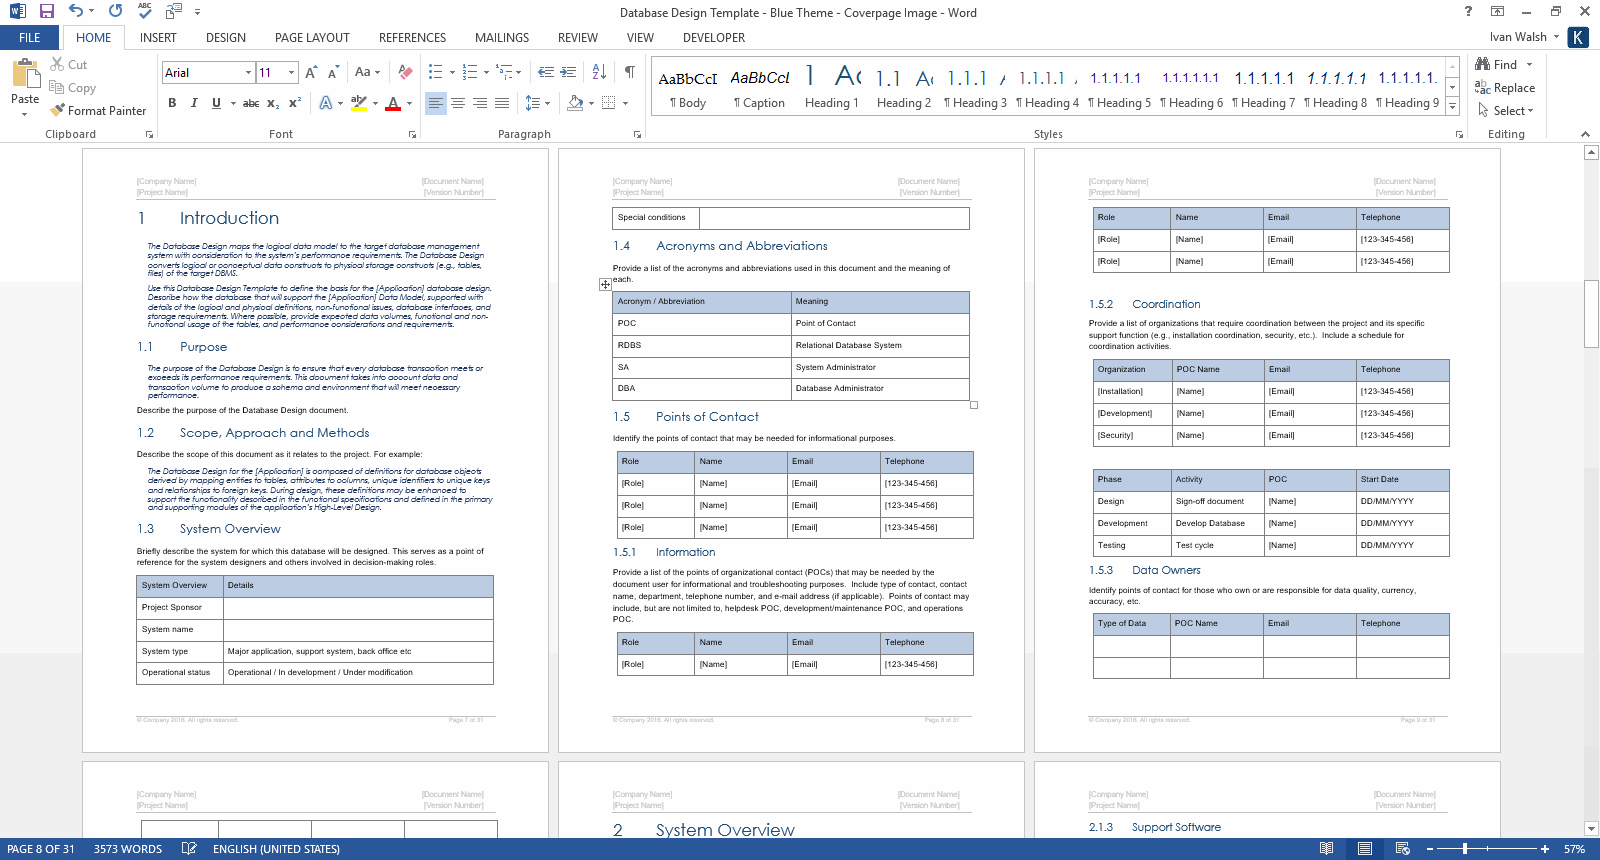 Business Report Template Word